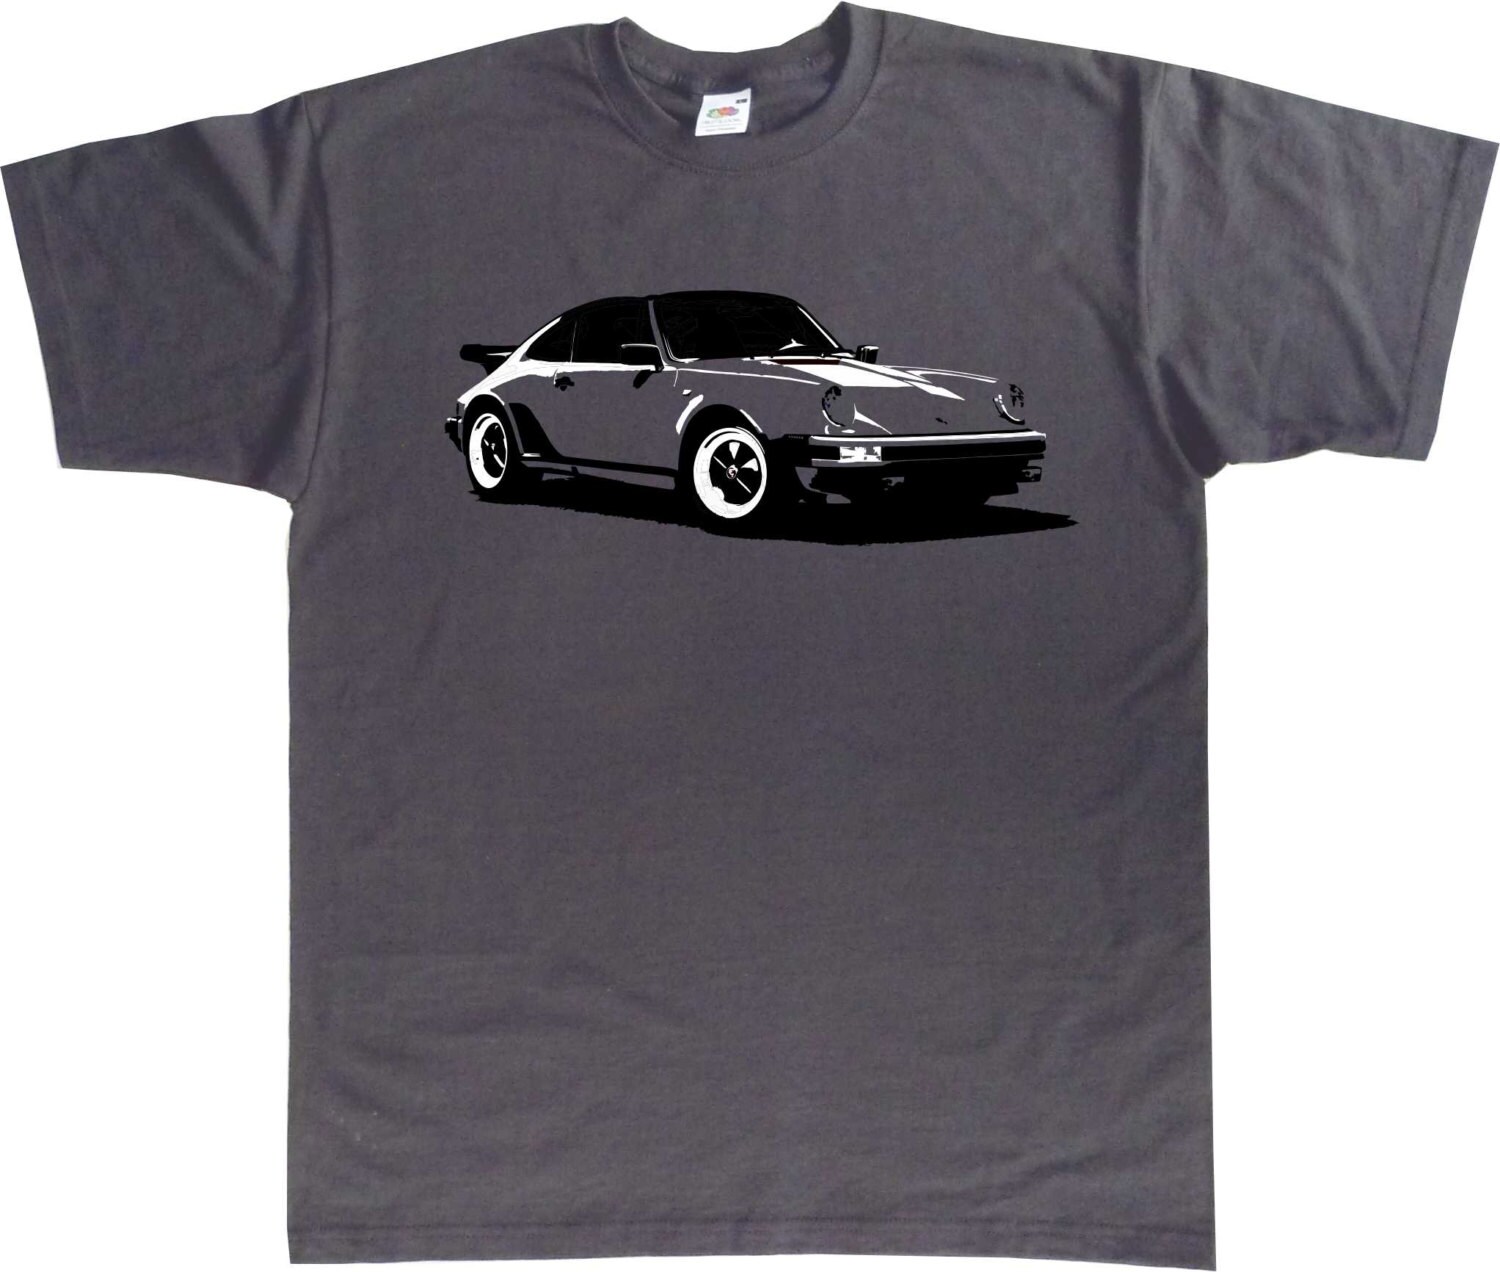 Classic 911 Turbo T-Shirt Porsche Inspired BC120 Various | Etsy